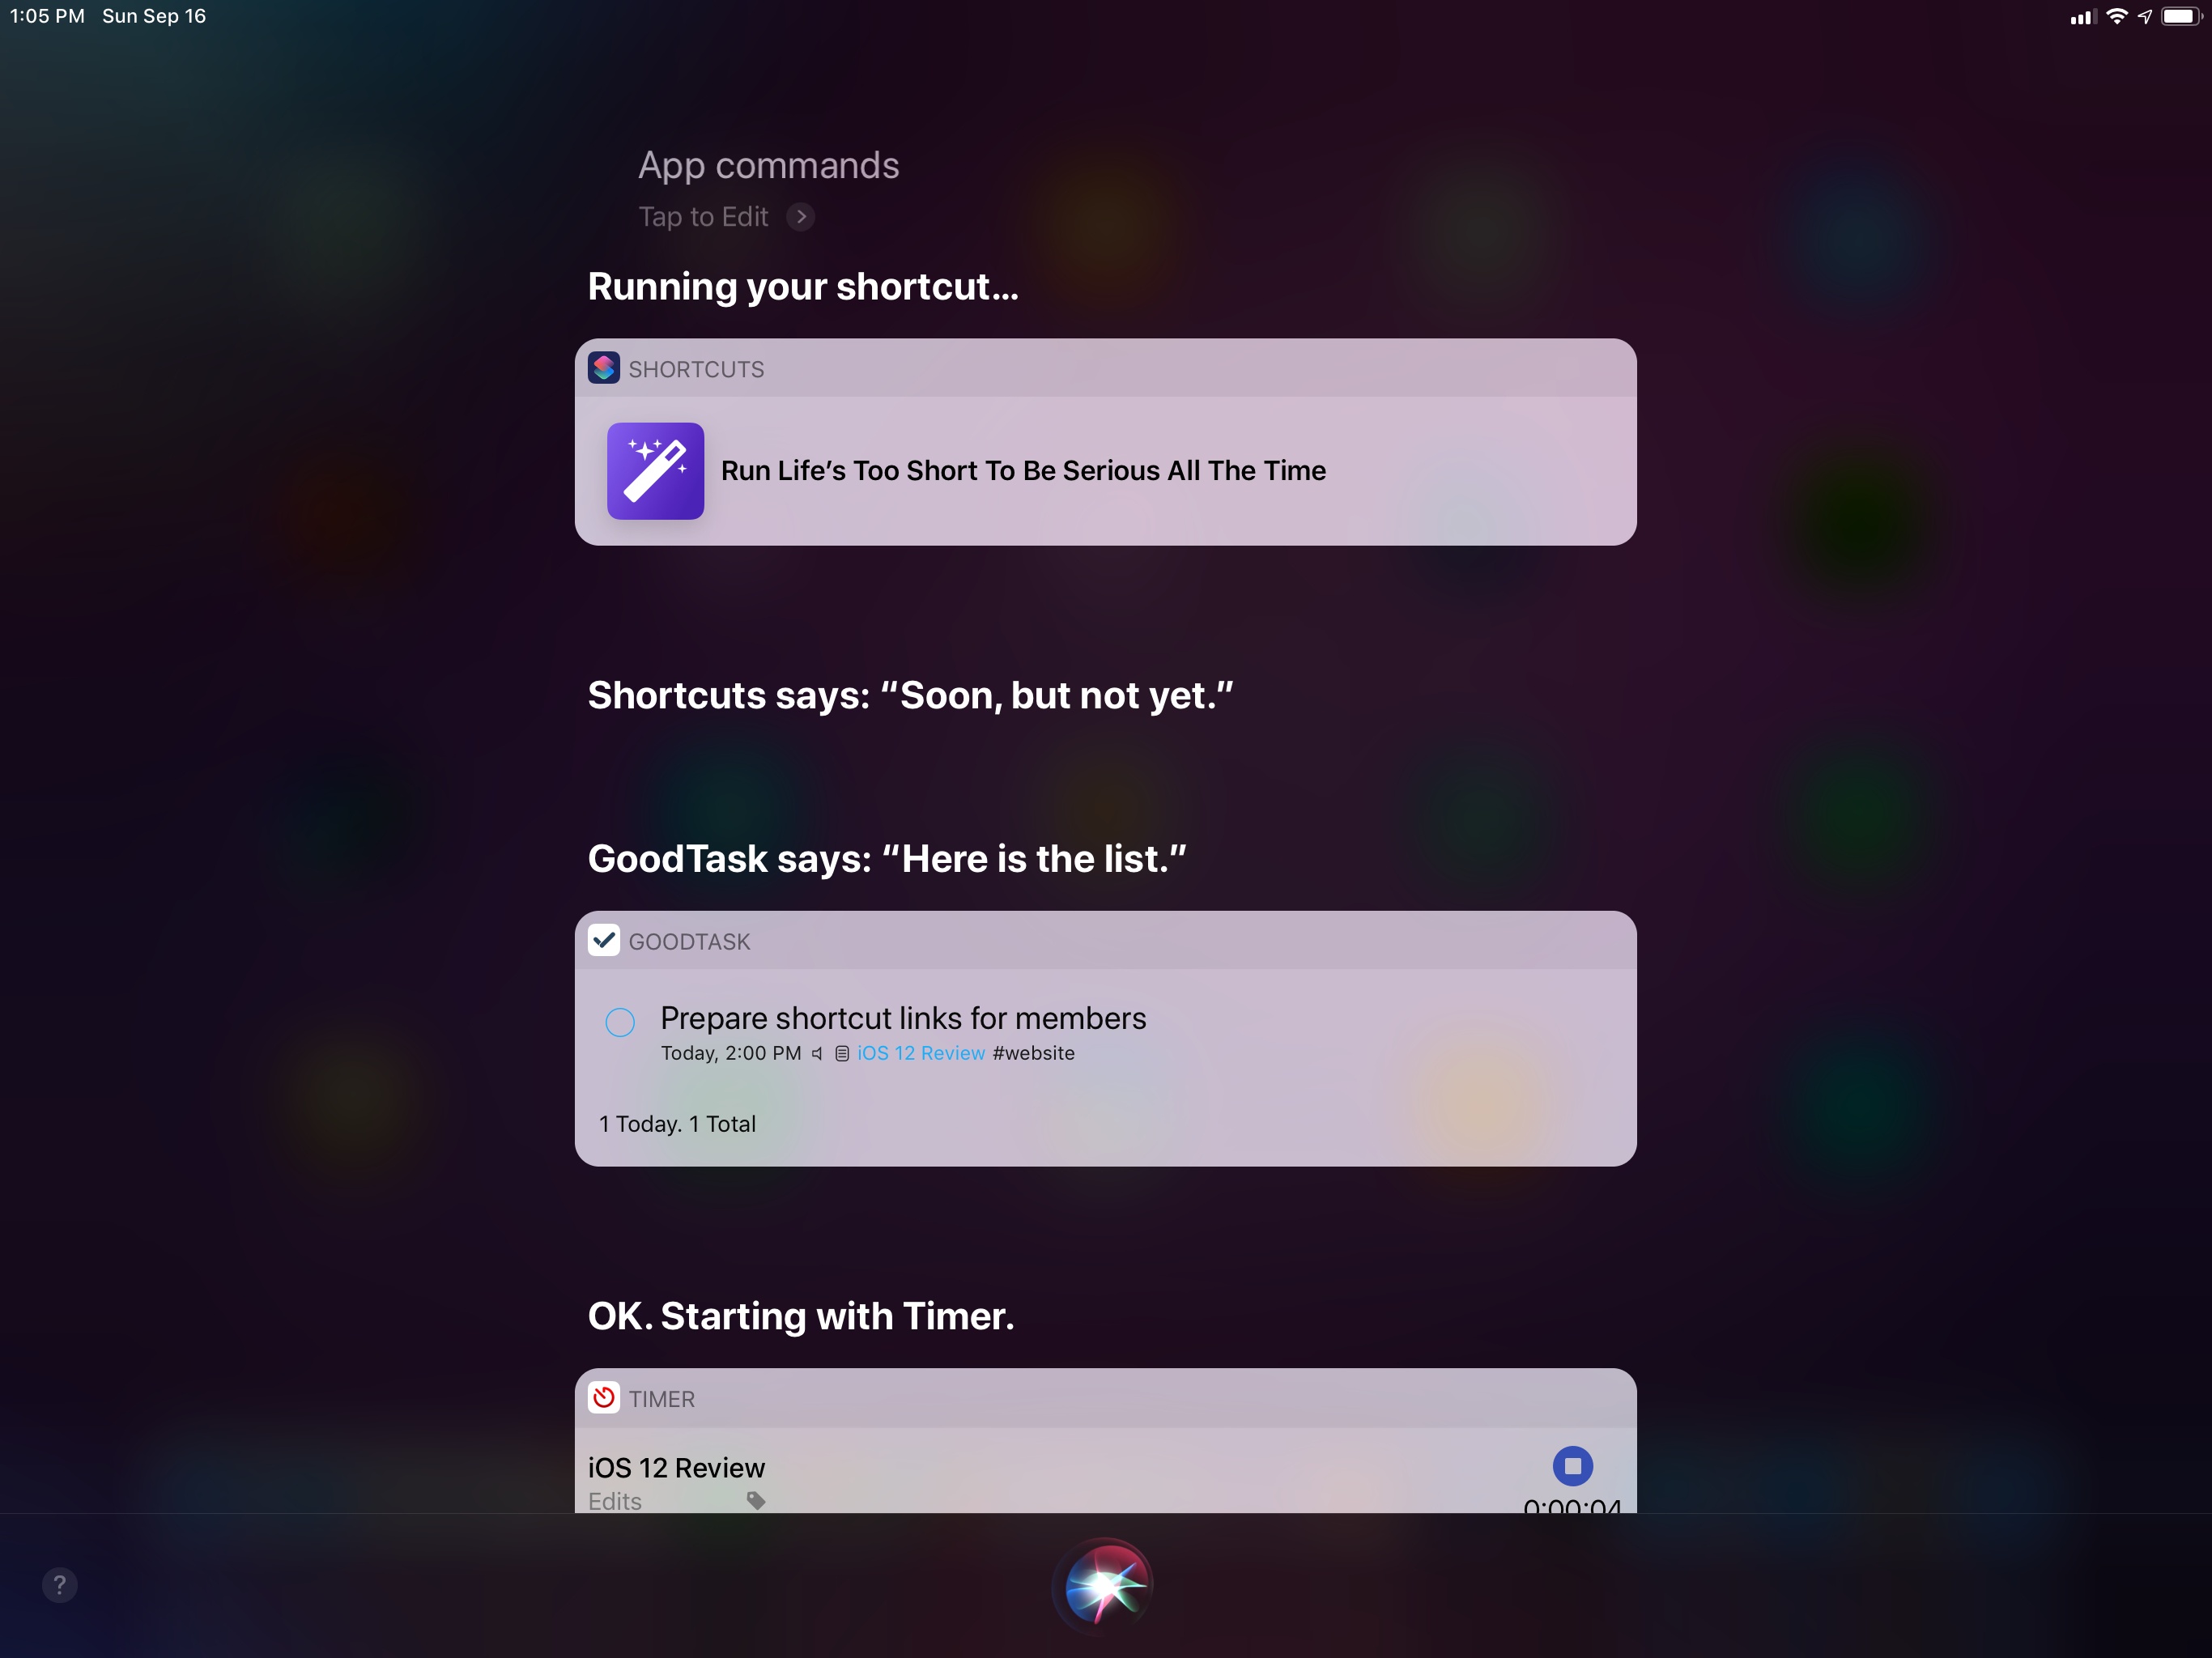 ...become multiple visual responses in Siri.